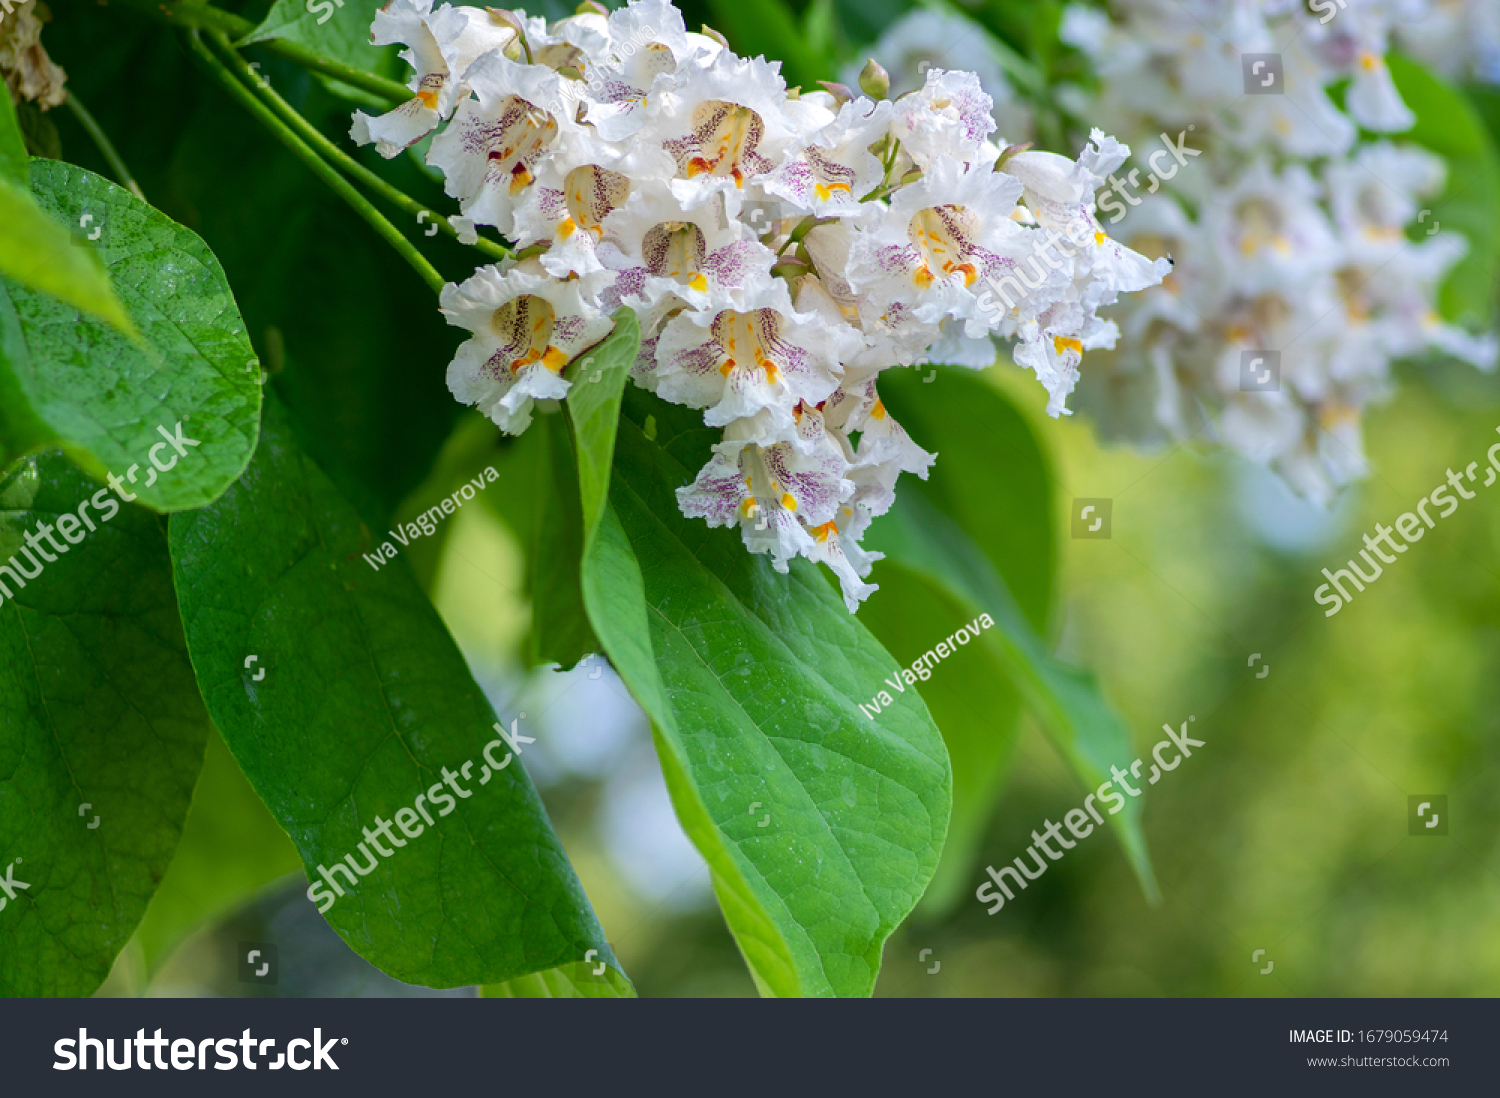 Catalpa bignonioides medium sized deciduous ornamental flowering tree, branches with groups of white cigartree flowers, buds and green leaves #1679059474